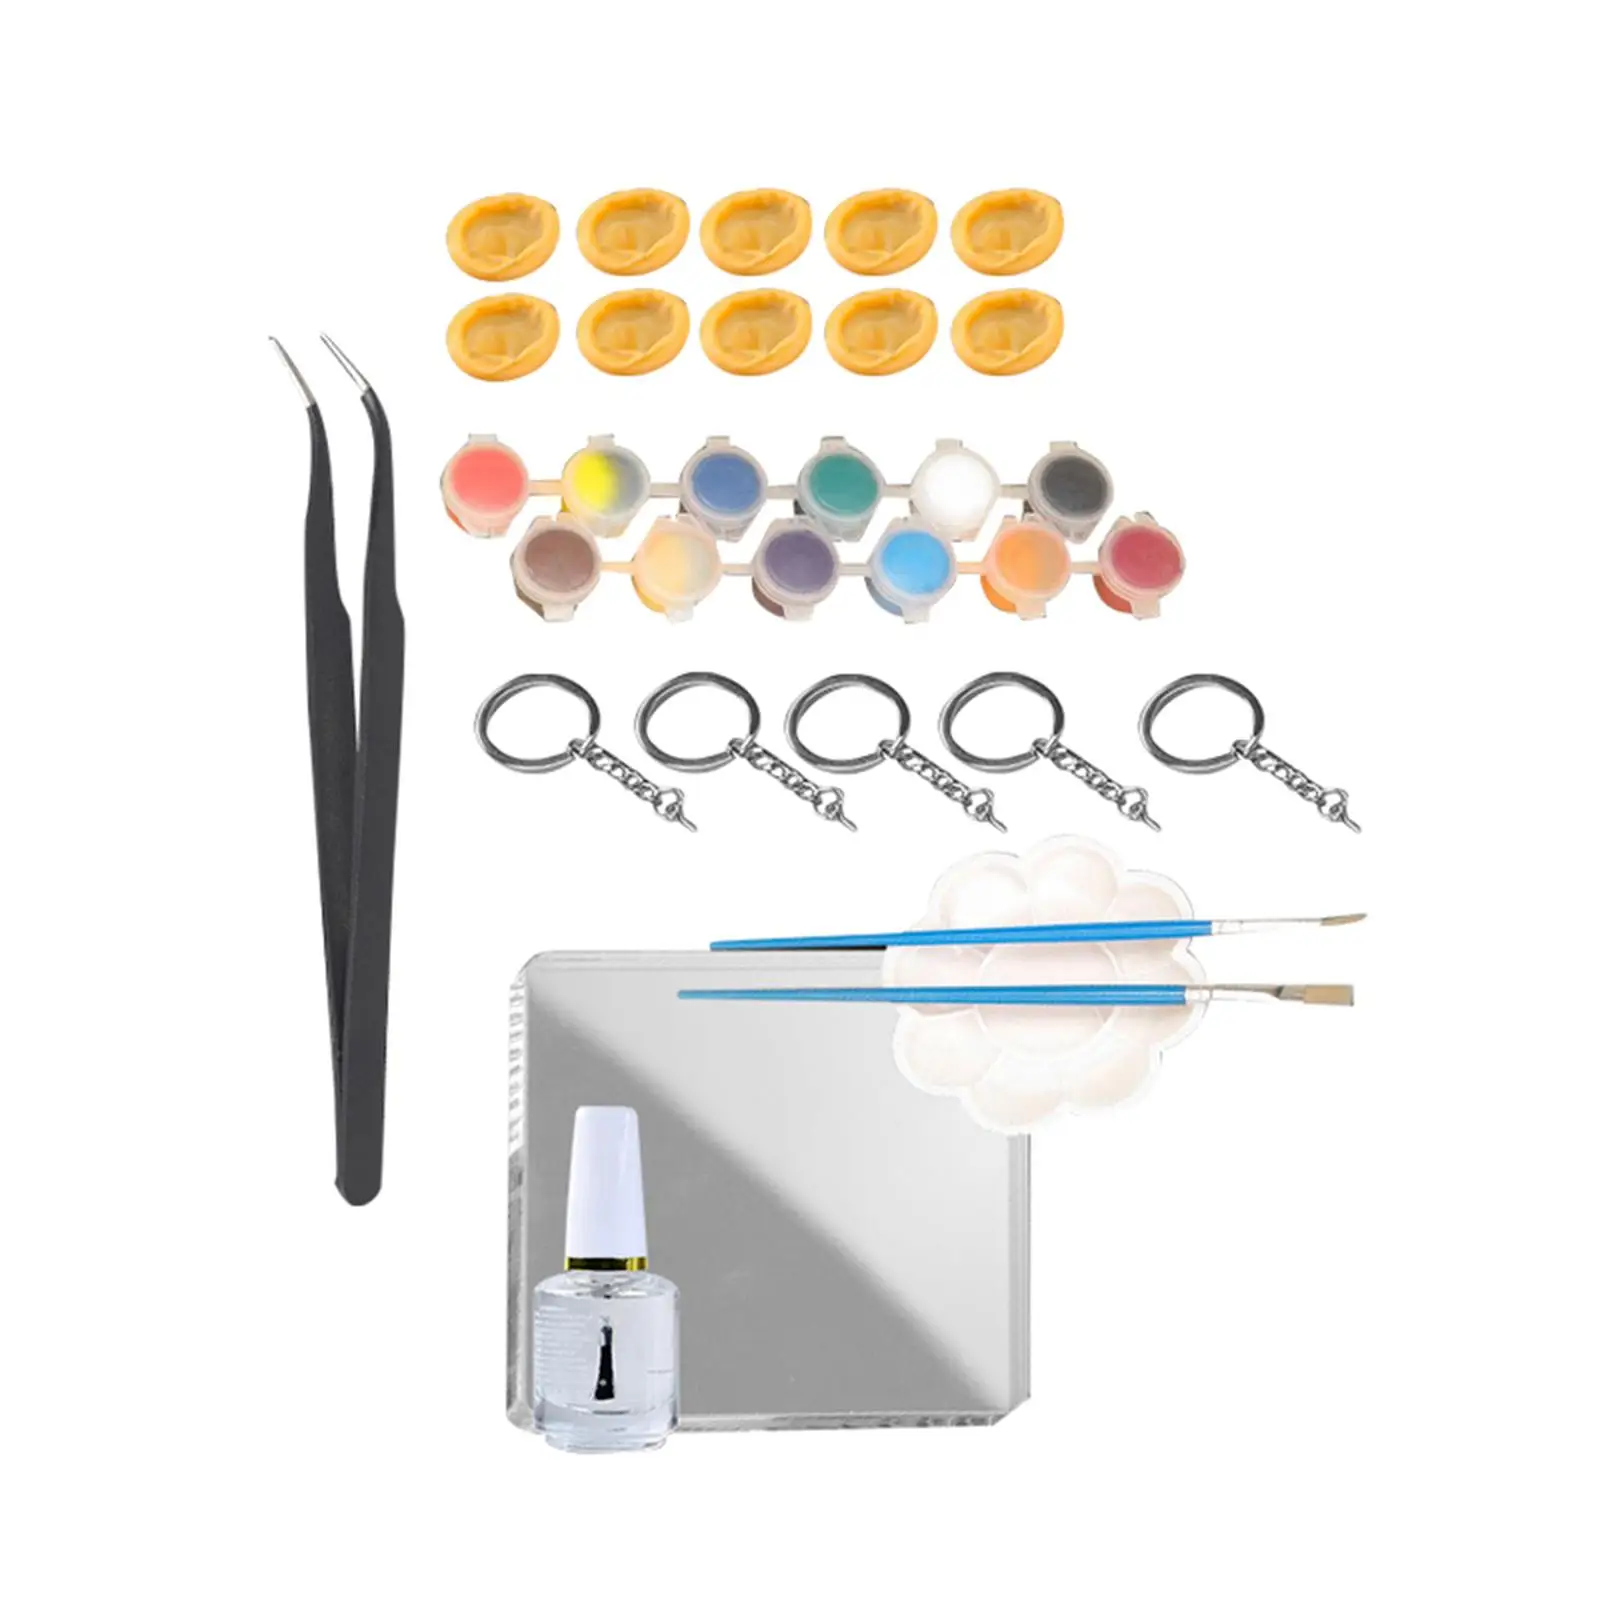 Polymer Clay DIY Tool Set Acrylic Pigment Material Art Crafts for Craft Jewelry Making Resin Casting Modeling Sculpting Students